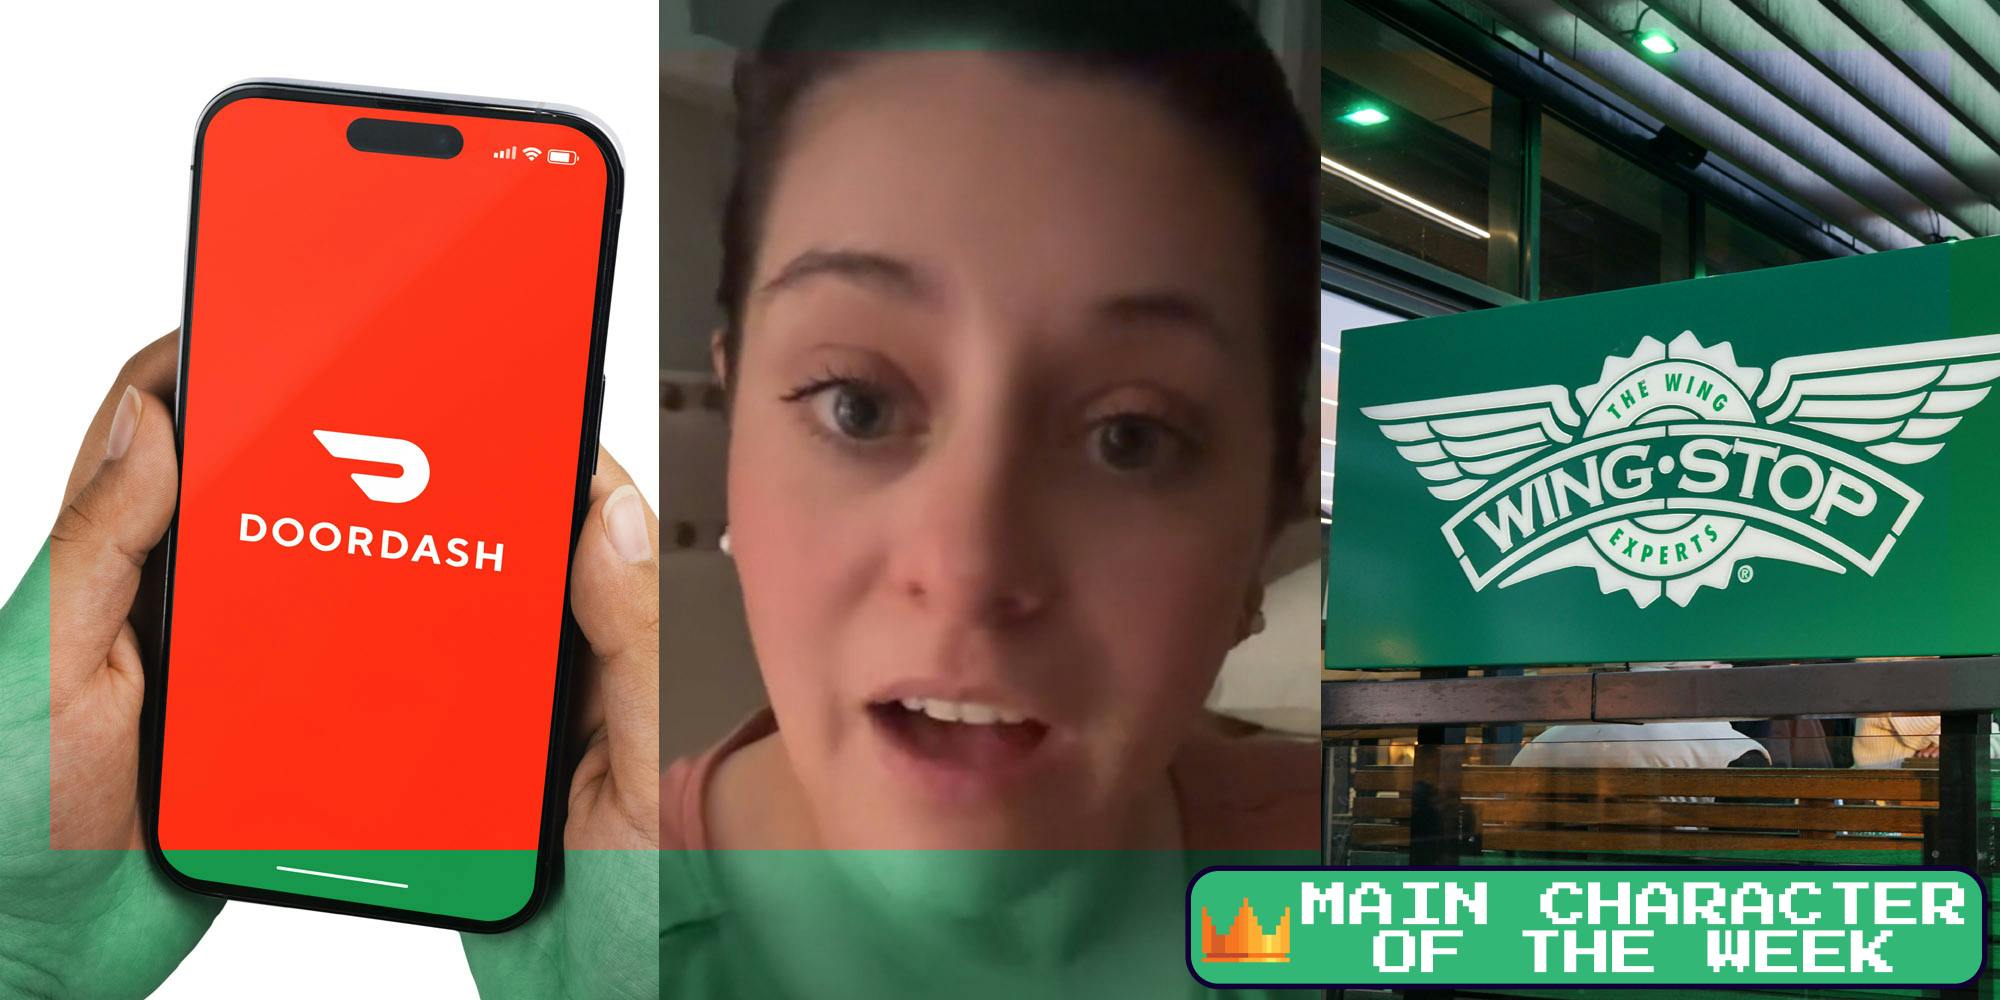 A phone with the DoorDash logo (l), a woman speaking to the camera (c), and a Wing Stop logo (r). In the bottom right corner is text that says 'Main Character of the Week' in a Daily Dot newsletter font.